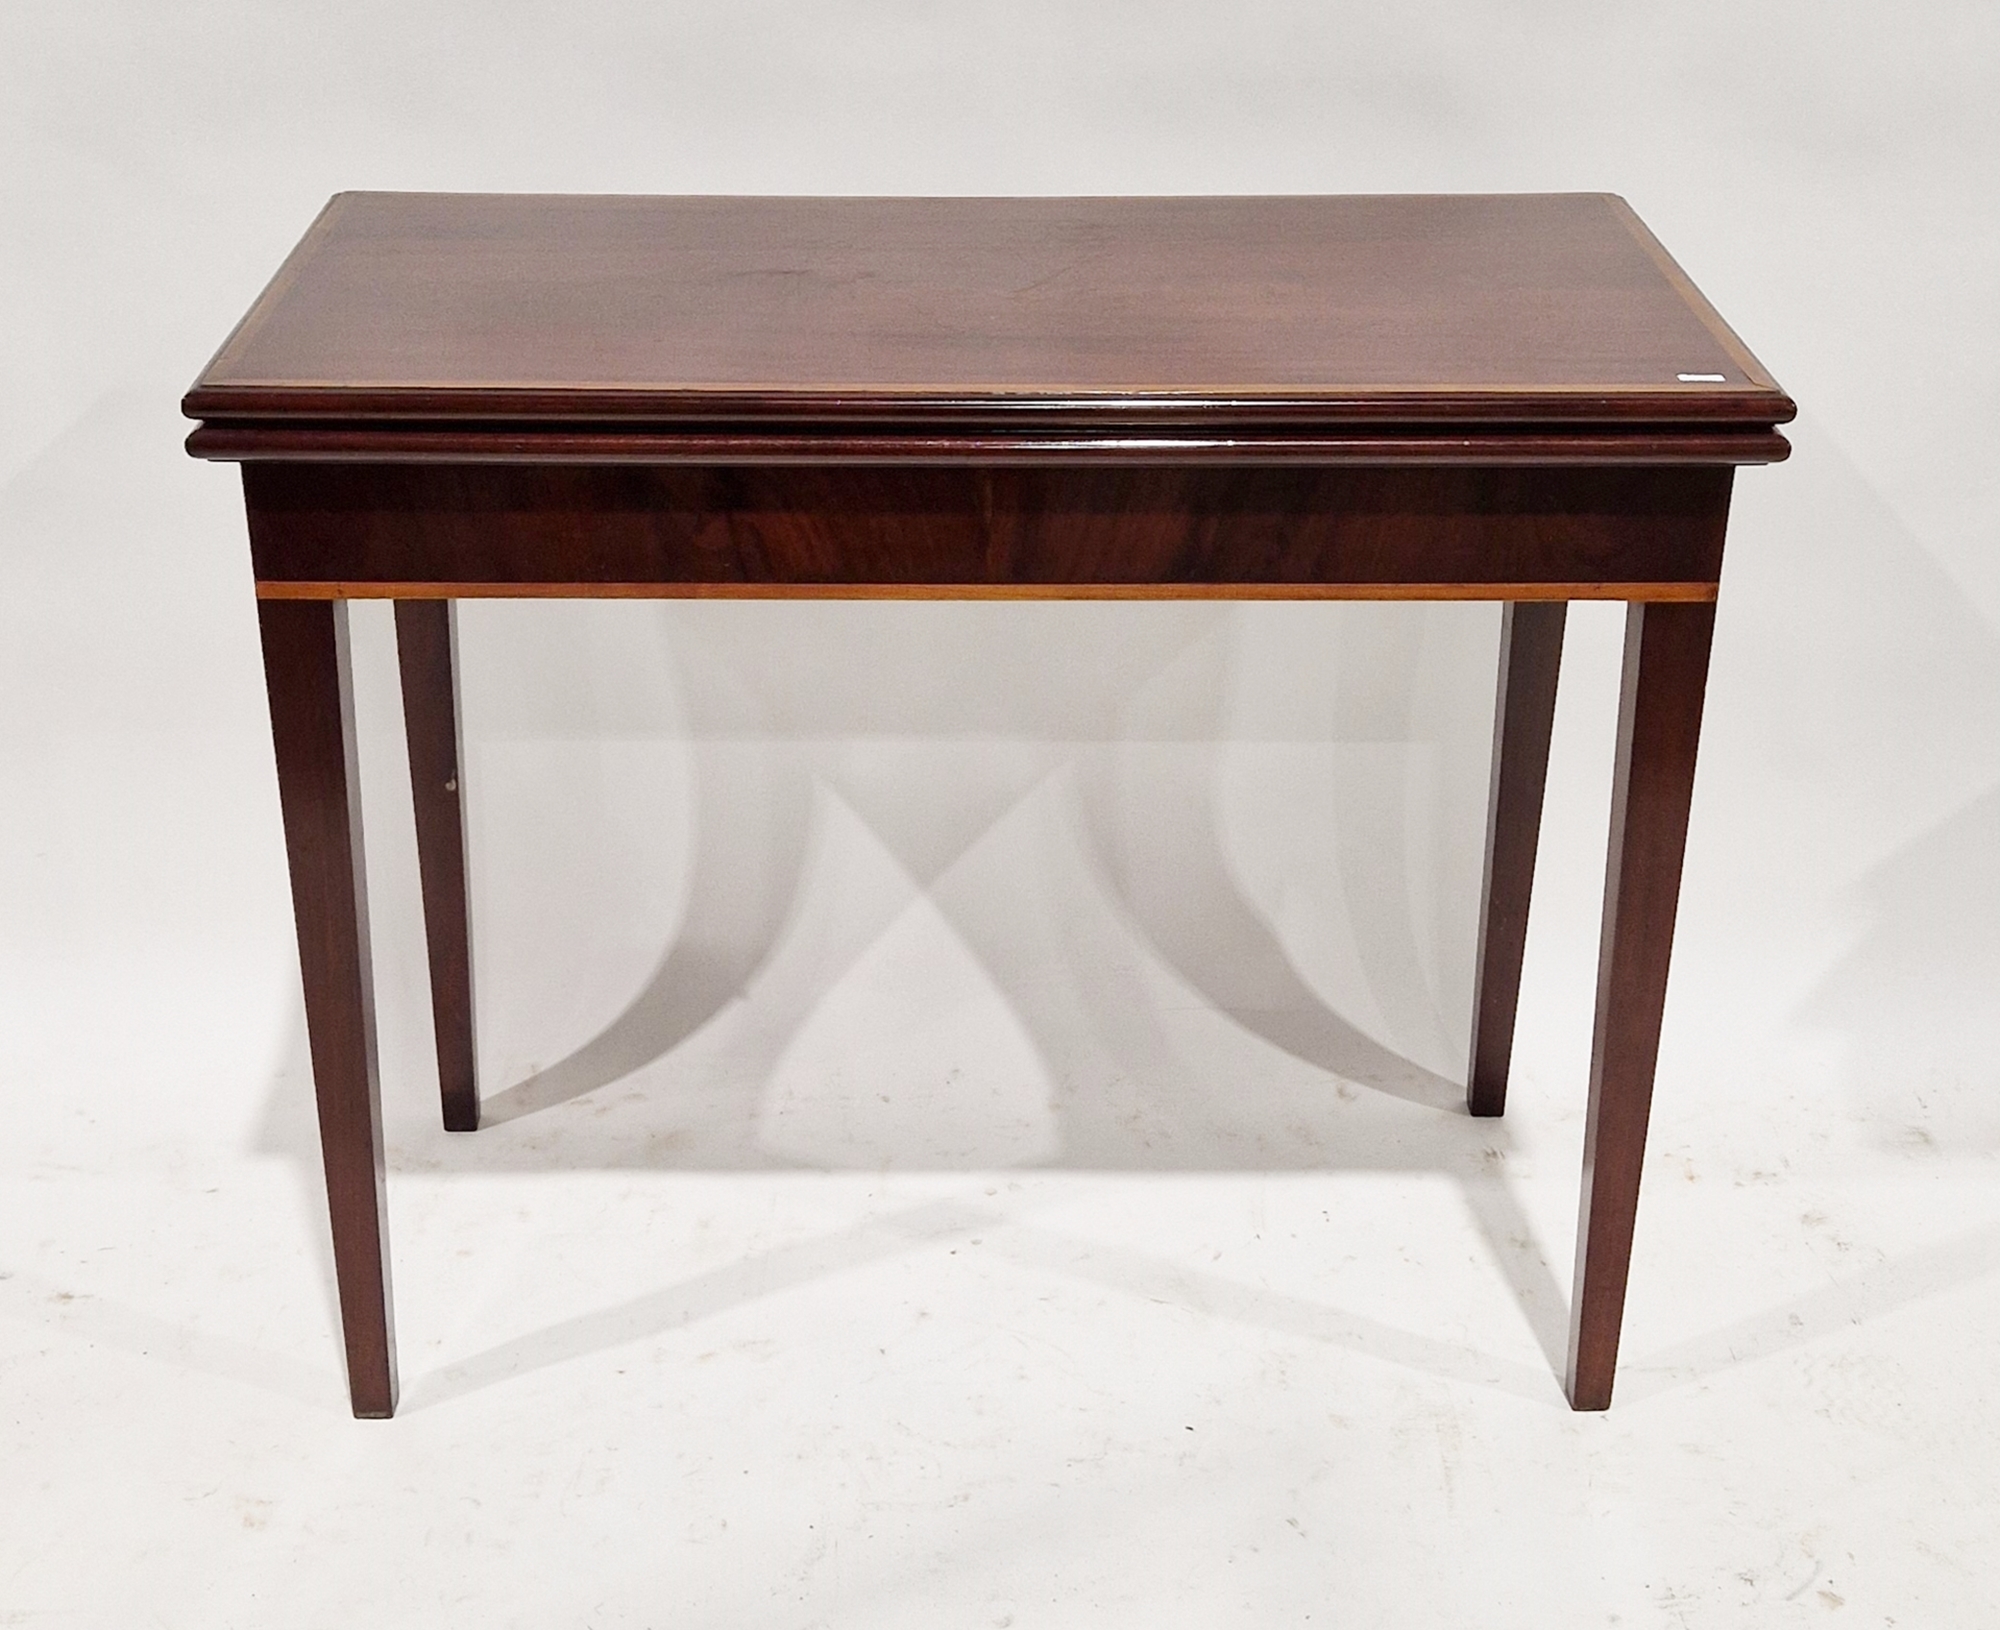 Georgian mahogany folding card table with satinwood inlaid border, opening to reveal a green baize